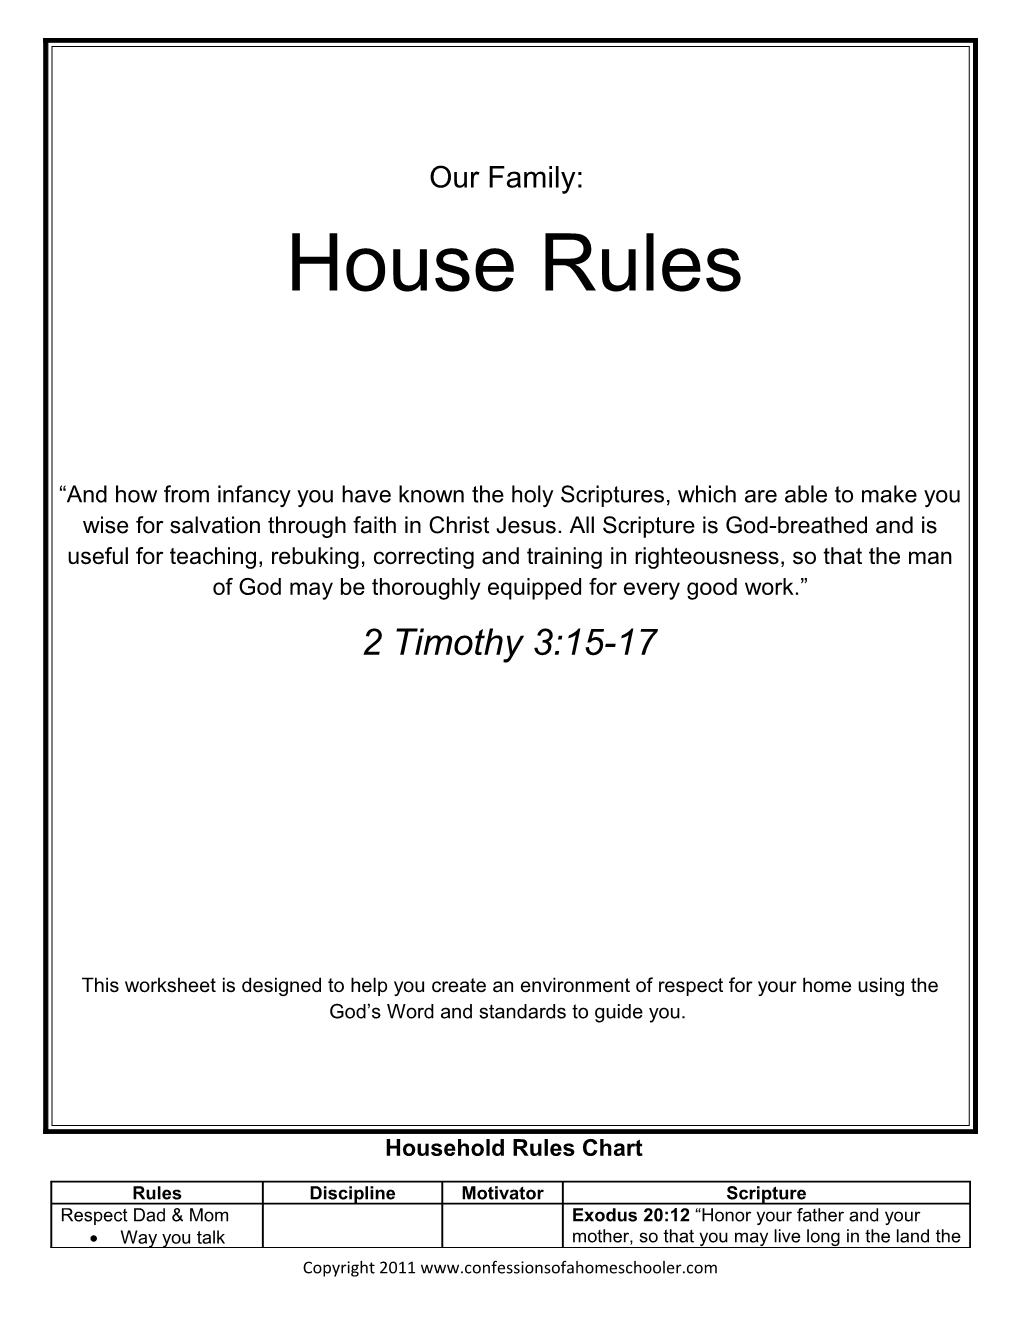 Household Rules Chart